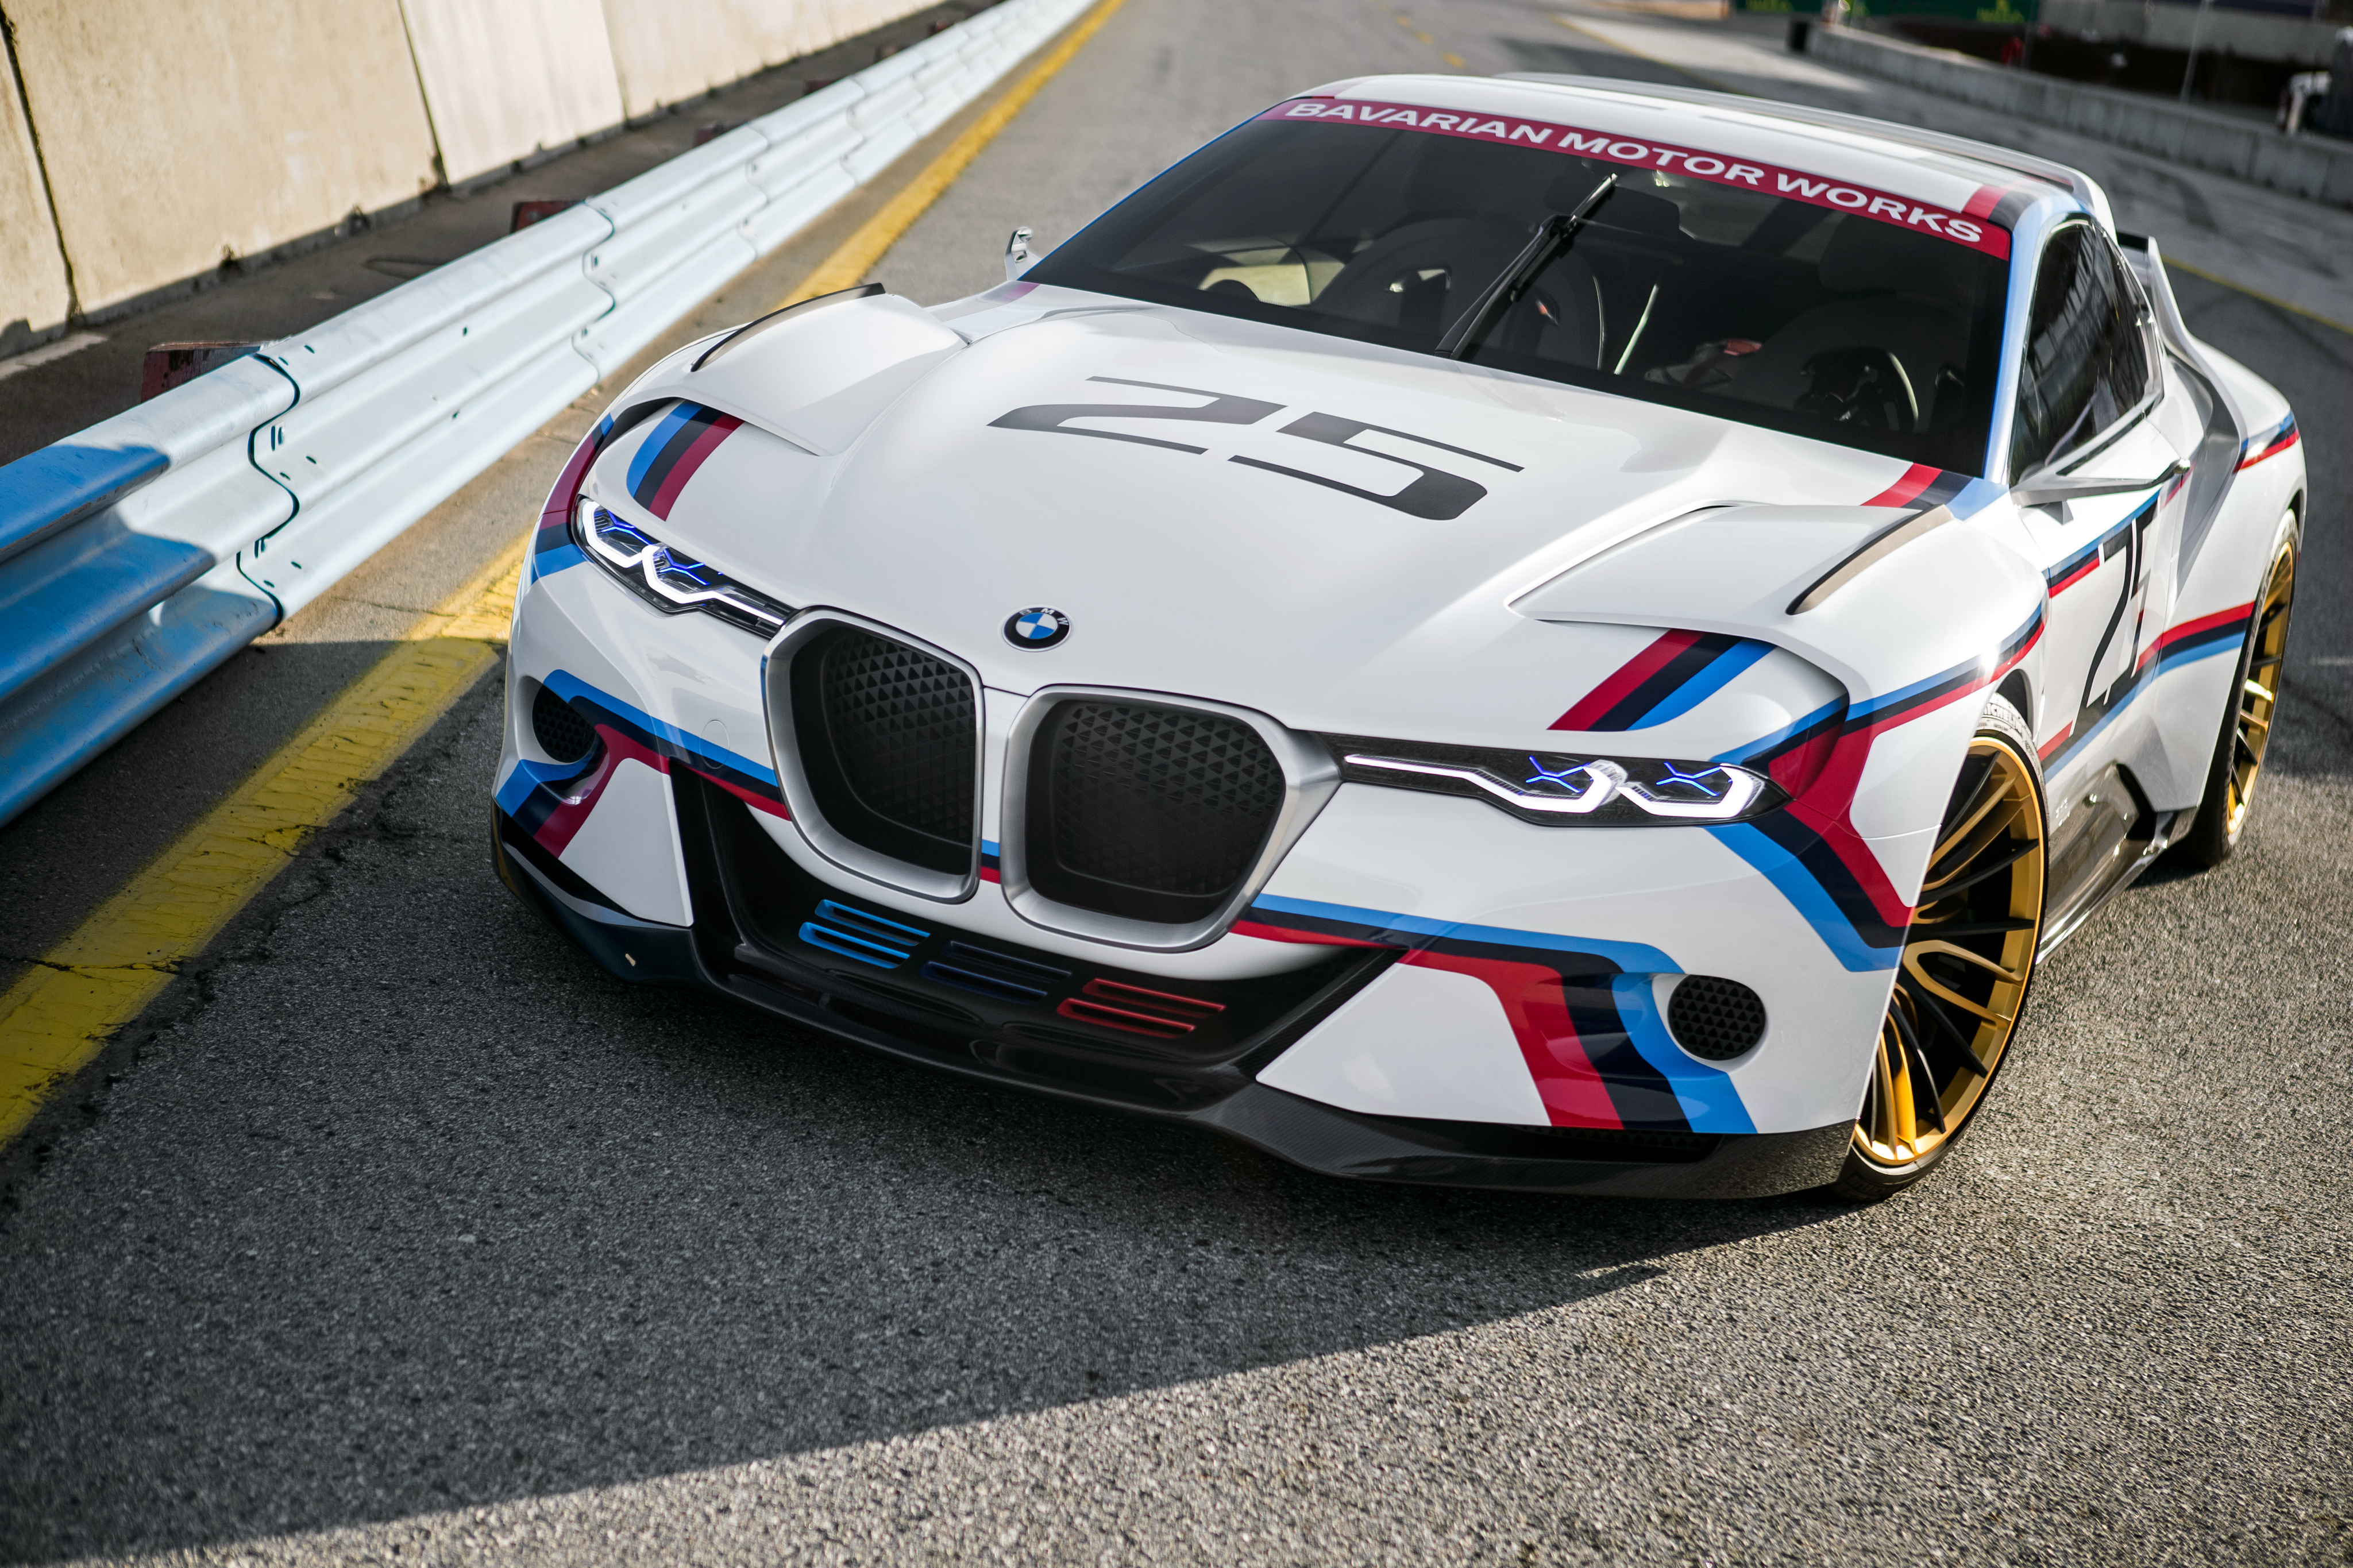 Bmw 3 0 Csl Hommage R 4k Wallpaper Racing Cars Supercars Cars 18